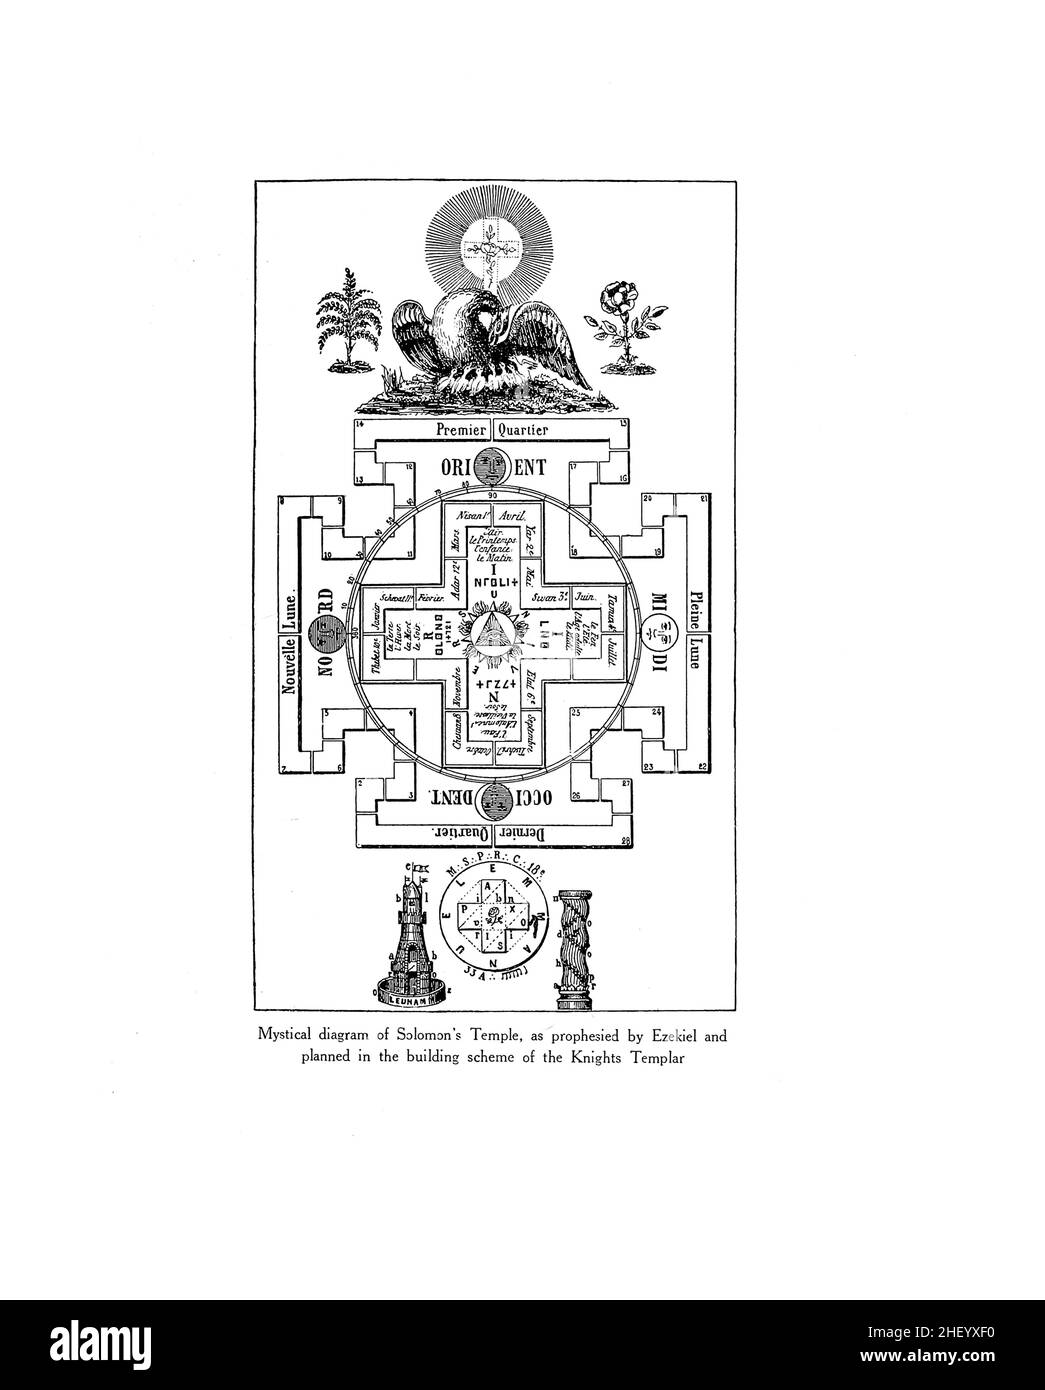 Mystical diagram of Solomon's Temple, as prophesied by Ezekiel and planned in the building scheme of the Knights Templar from An encyclopaedia of occultism : a compendium of information on the occult sciences, occult personalities, psychic science, magic, demonology, spiritism and mysticism by Lewis Spence, Published in London by George Routledge & sons, ltd. in 1920 Stock Photo